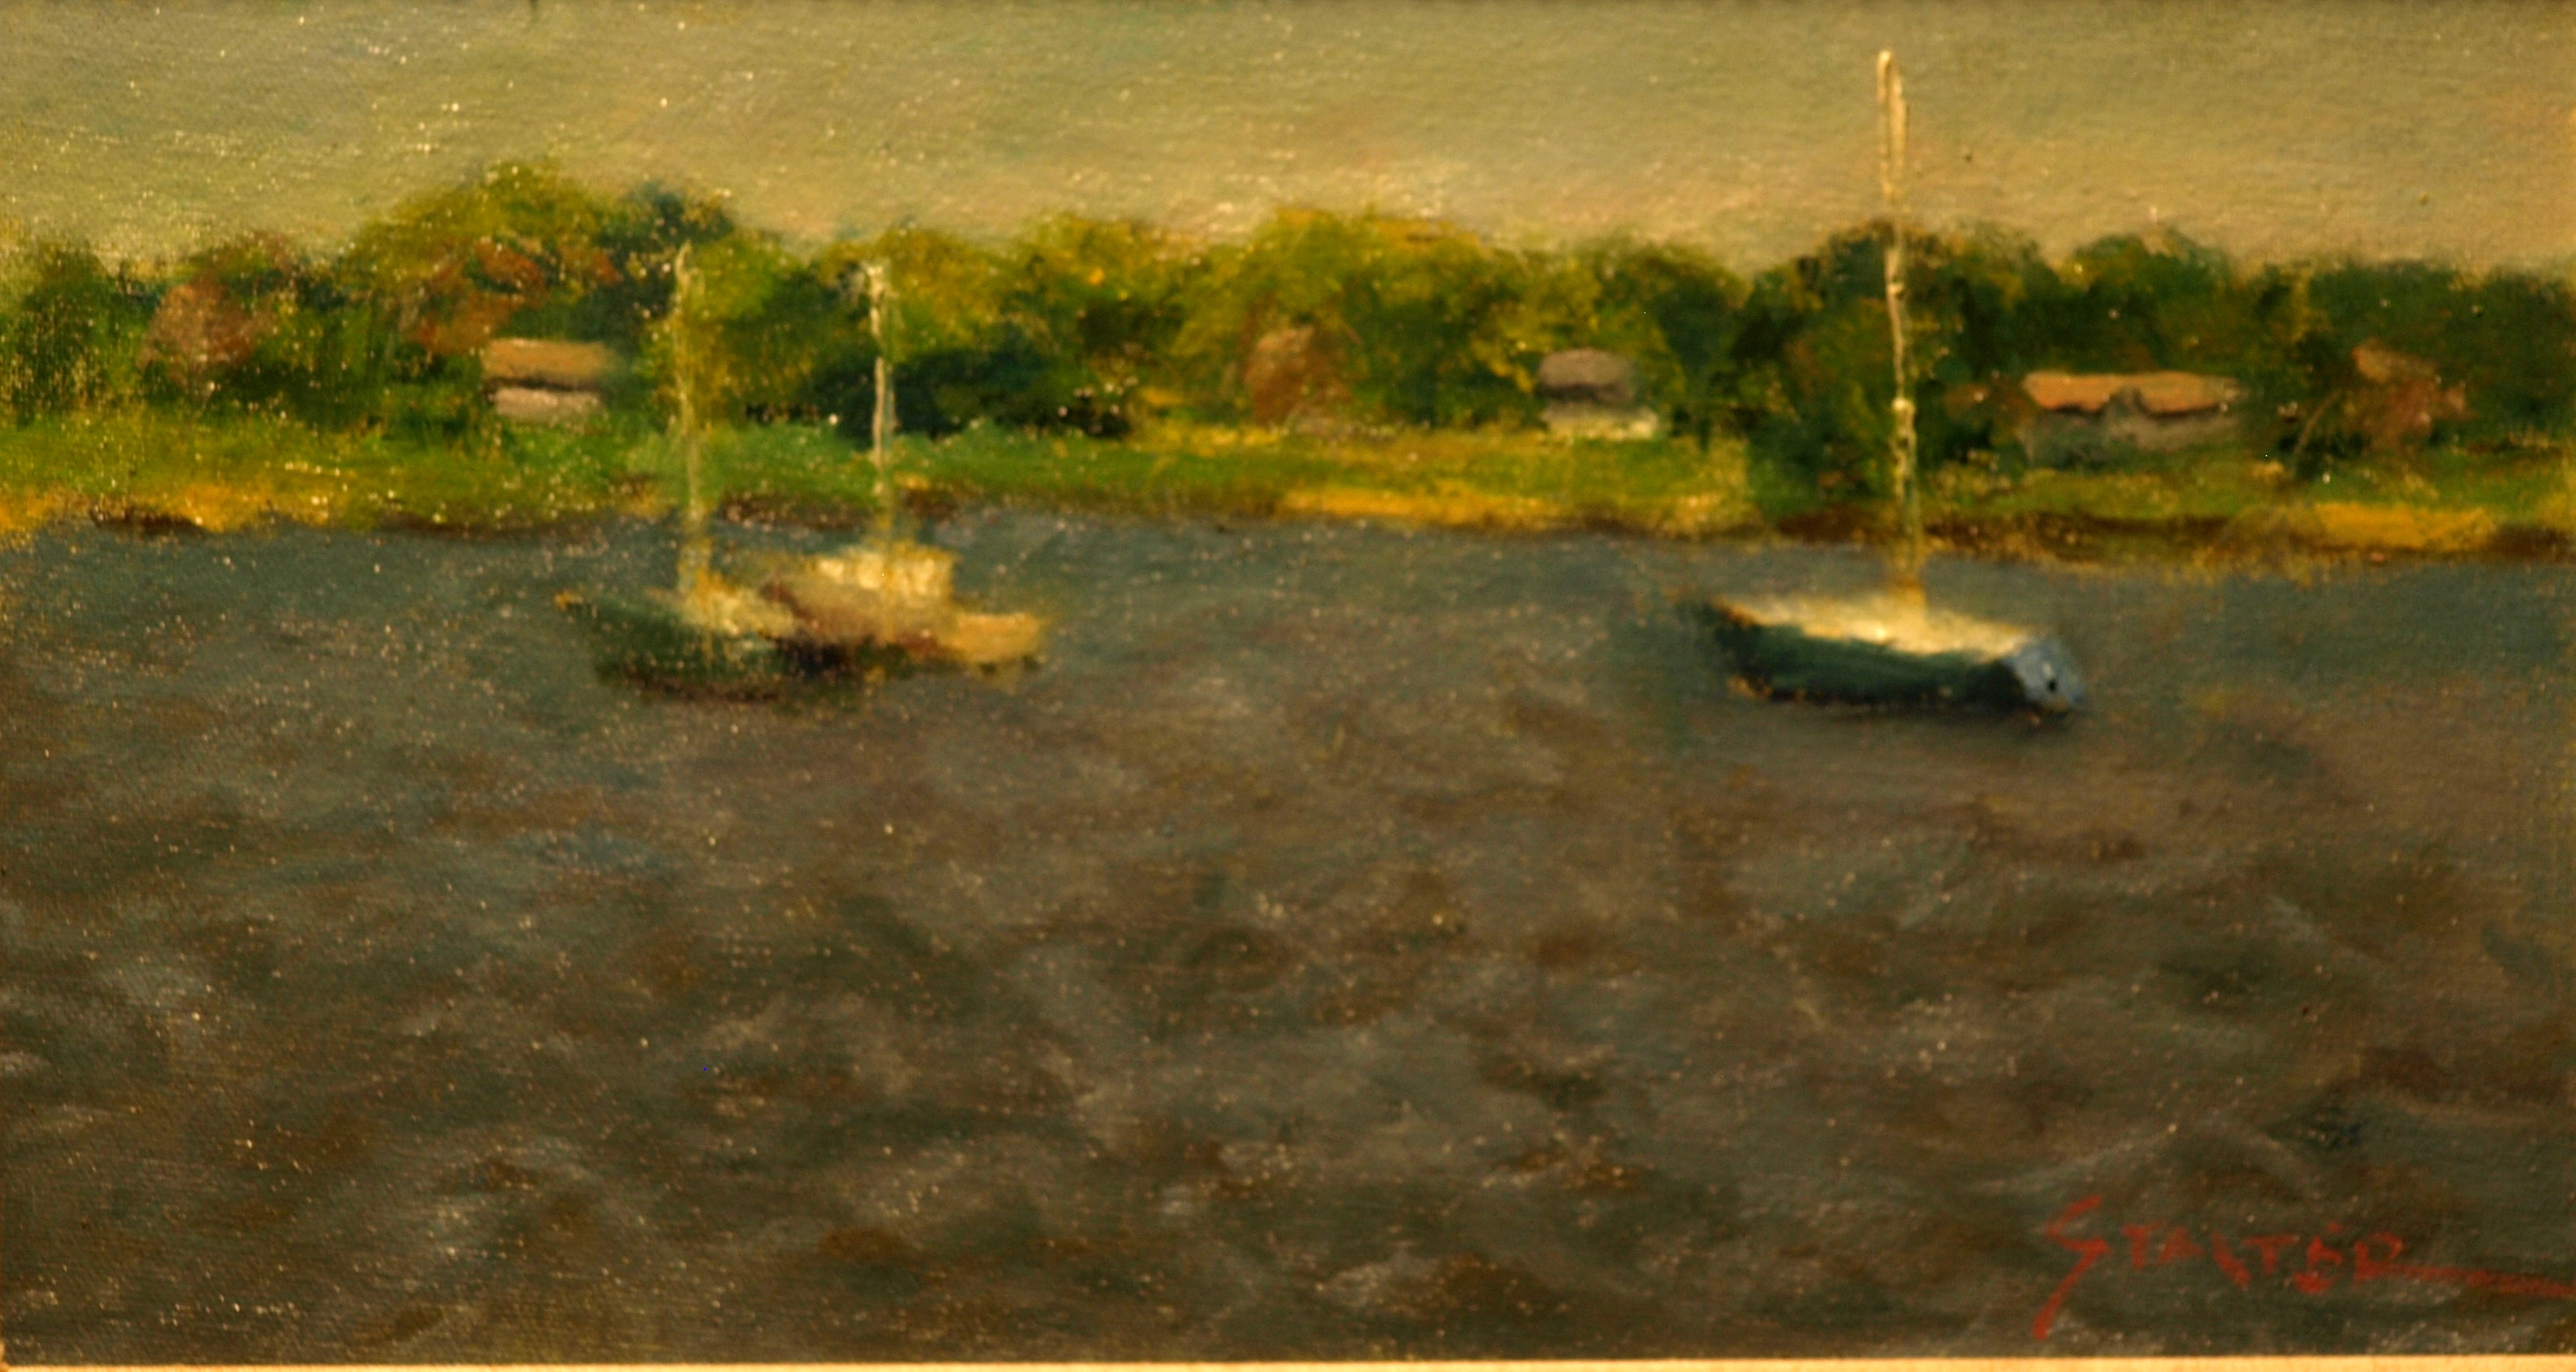 Choppy Waters, Oil on Canvas on Panel, 8 x 14 Inches, by Richard Stalter, $225